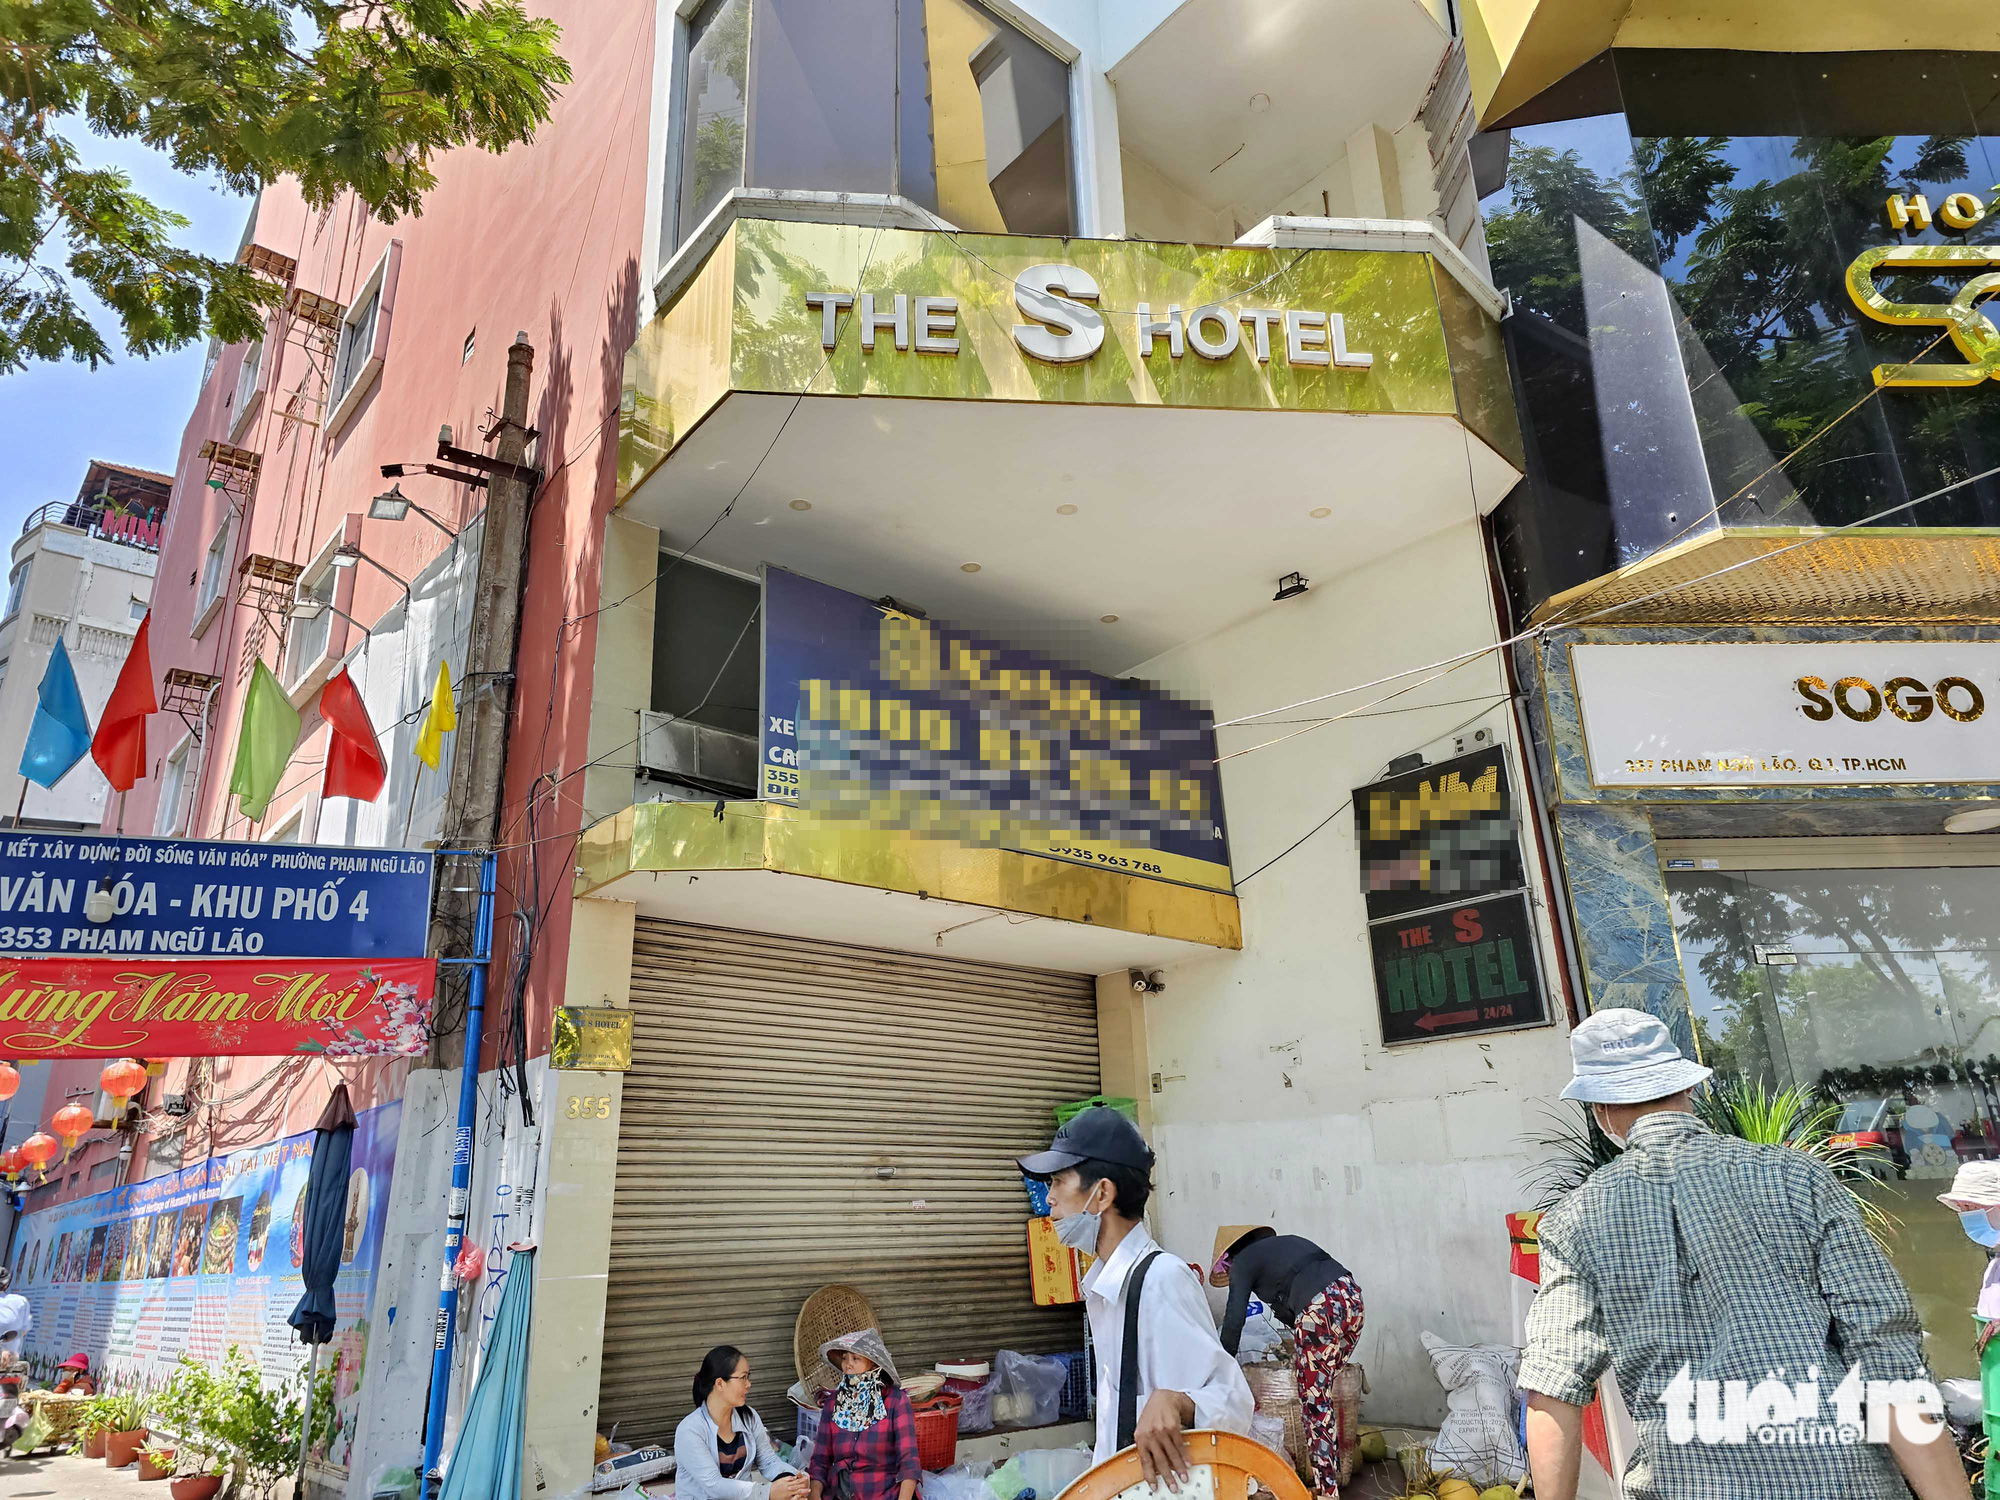 A hotel on Pham Ngu Lao Street, District 1, Ho Chi Minh City, is inactive. Photo: Ngoc Hien / Tuoi Tre